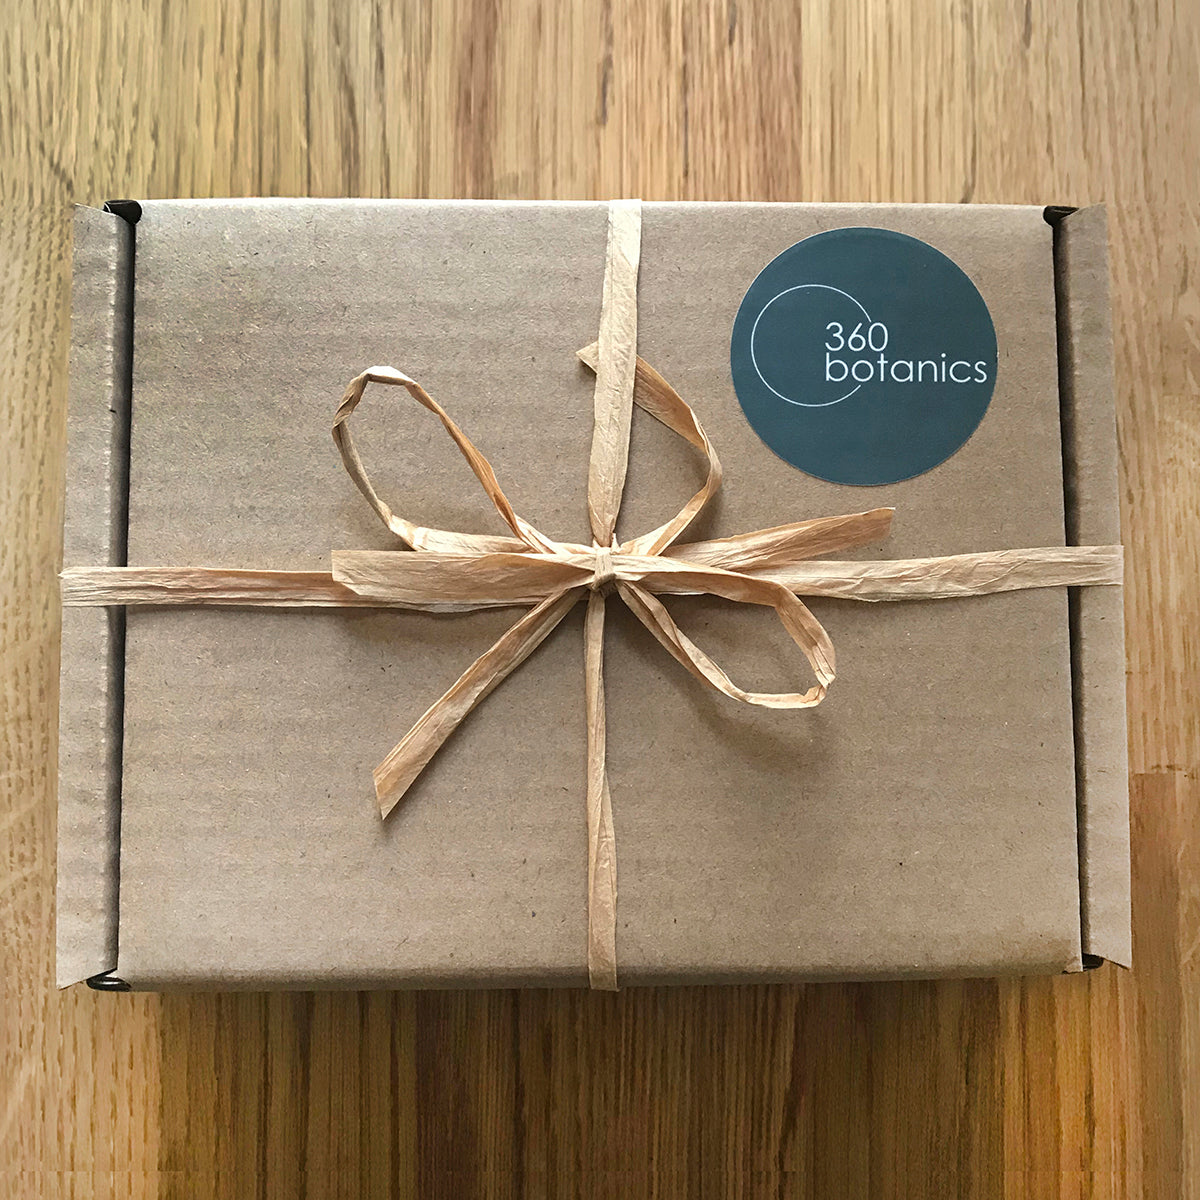 A gift box with a natural brown kraft paper finish, tied with a raffia ribbon in a bow on top. The box has a circular sticker with the logo "360 botanics" in a dark blue circle with white text. The box is placed on a wooden surface, suggesting an eco-friendly or organic product inside.